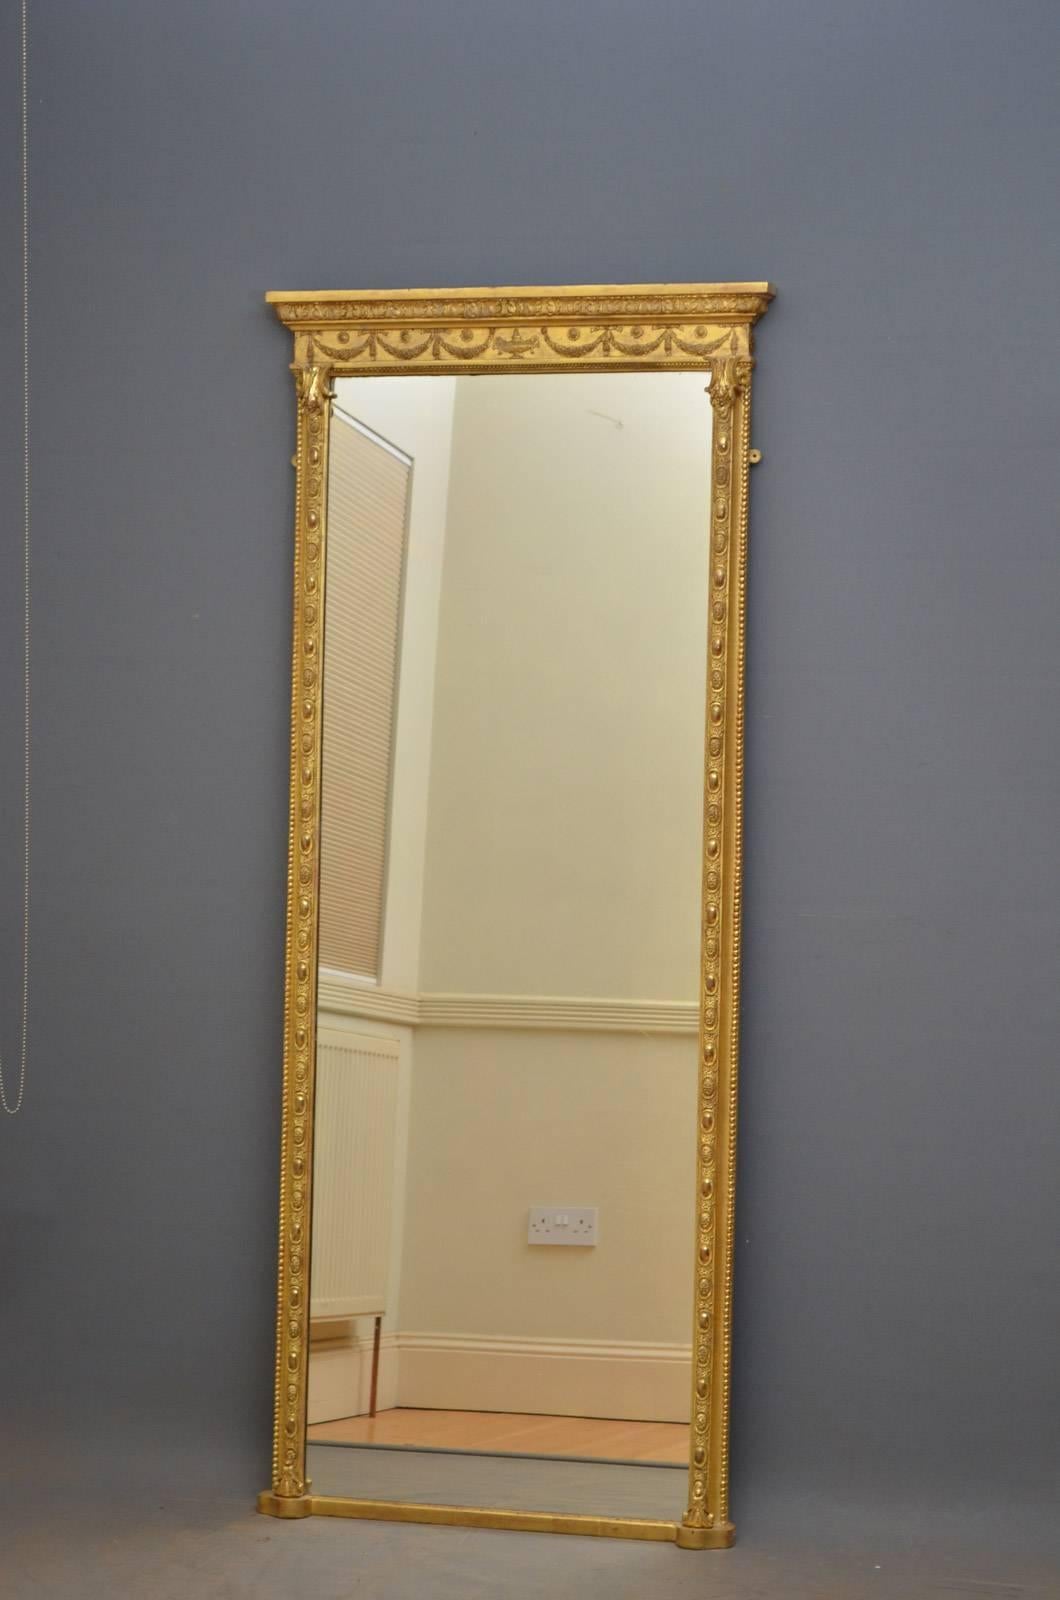 K0249 tall and slim early Victorian gilded mirror, having acanthus carved cornice above swags and bows and original mirror plate (with some imperfections) in finely decorated frame, all in excellent original condition throughout. This antique mirror